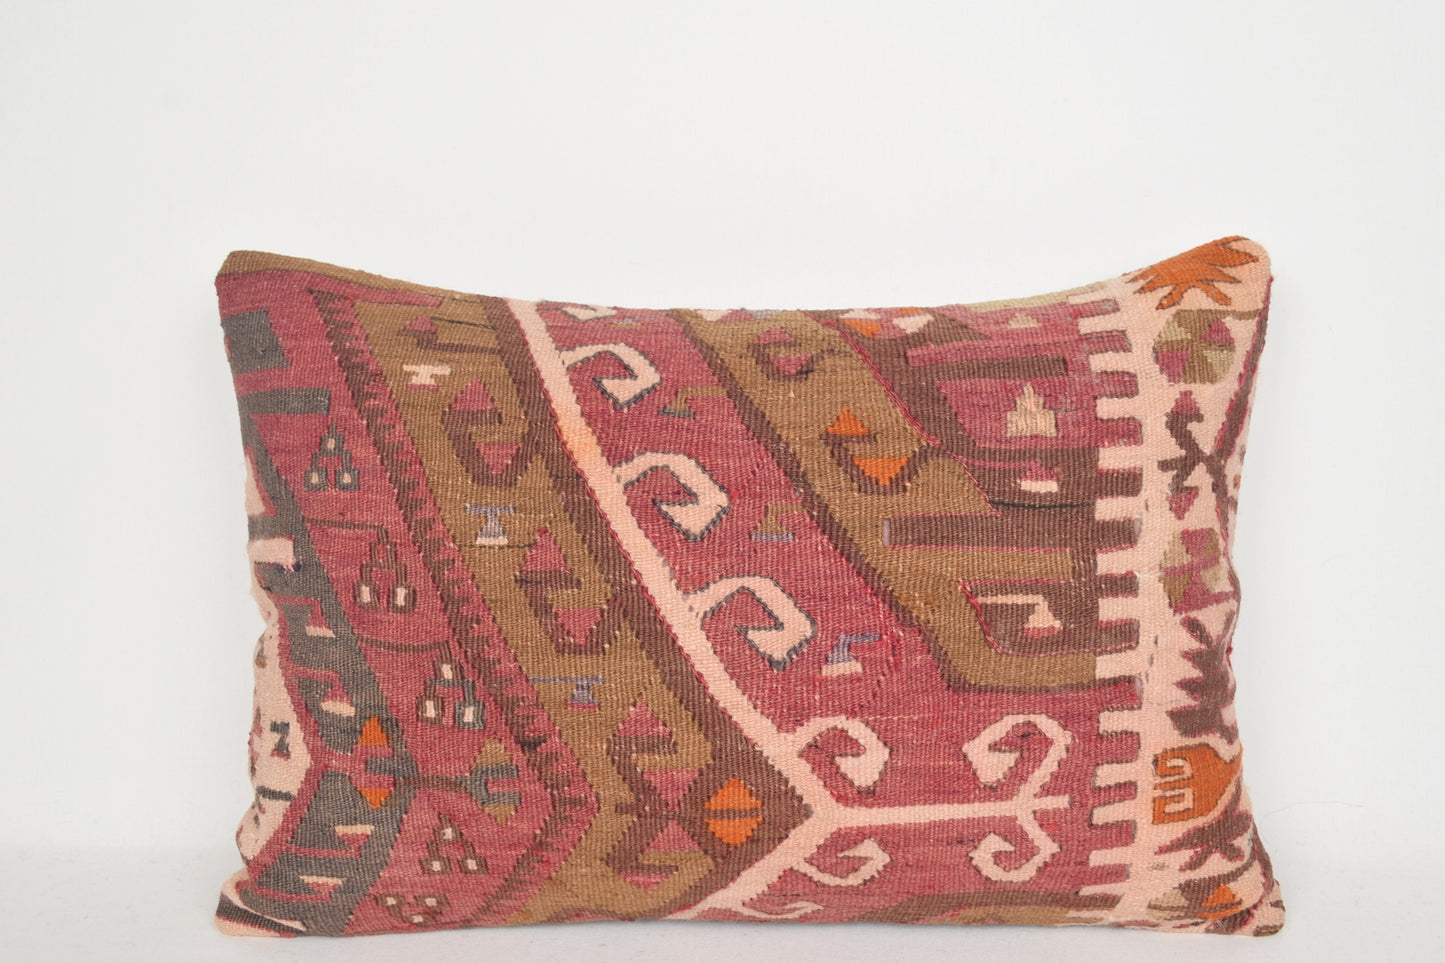 Kilim Cushions Etsy E00032 Lumbar Couch Free Shipping African